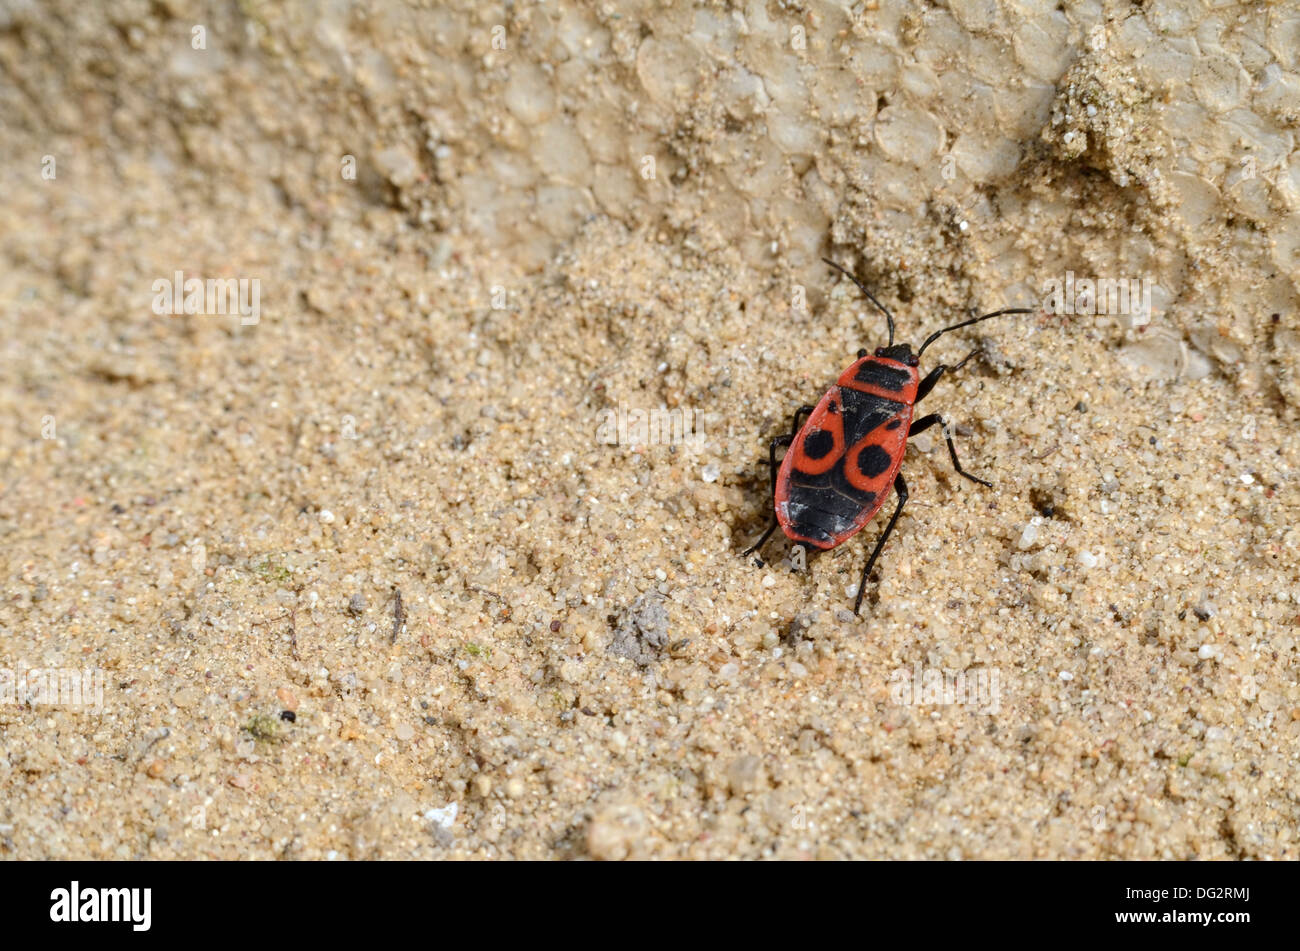 A Single Firebug Crawling in the Pure Sand Right Stock Photo